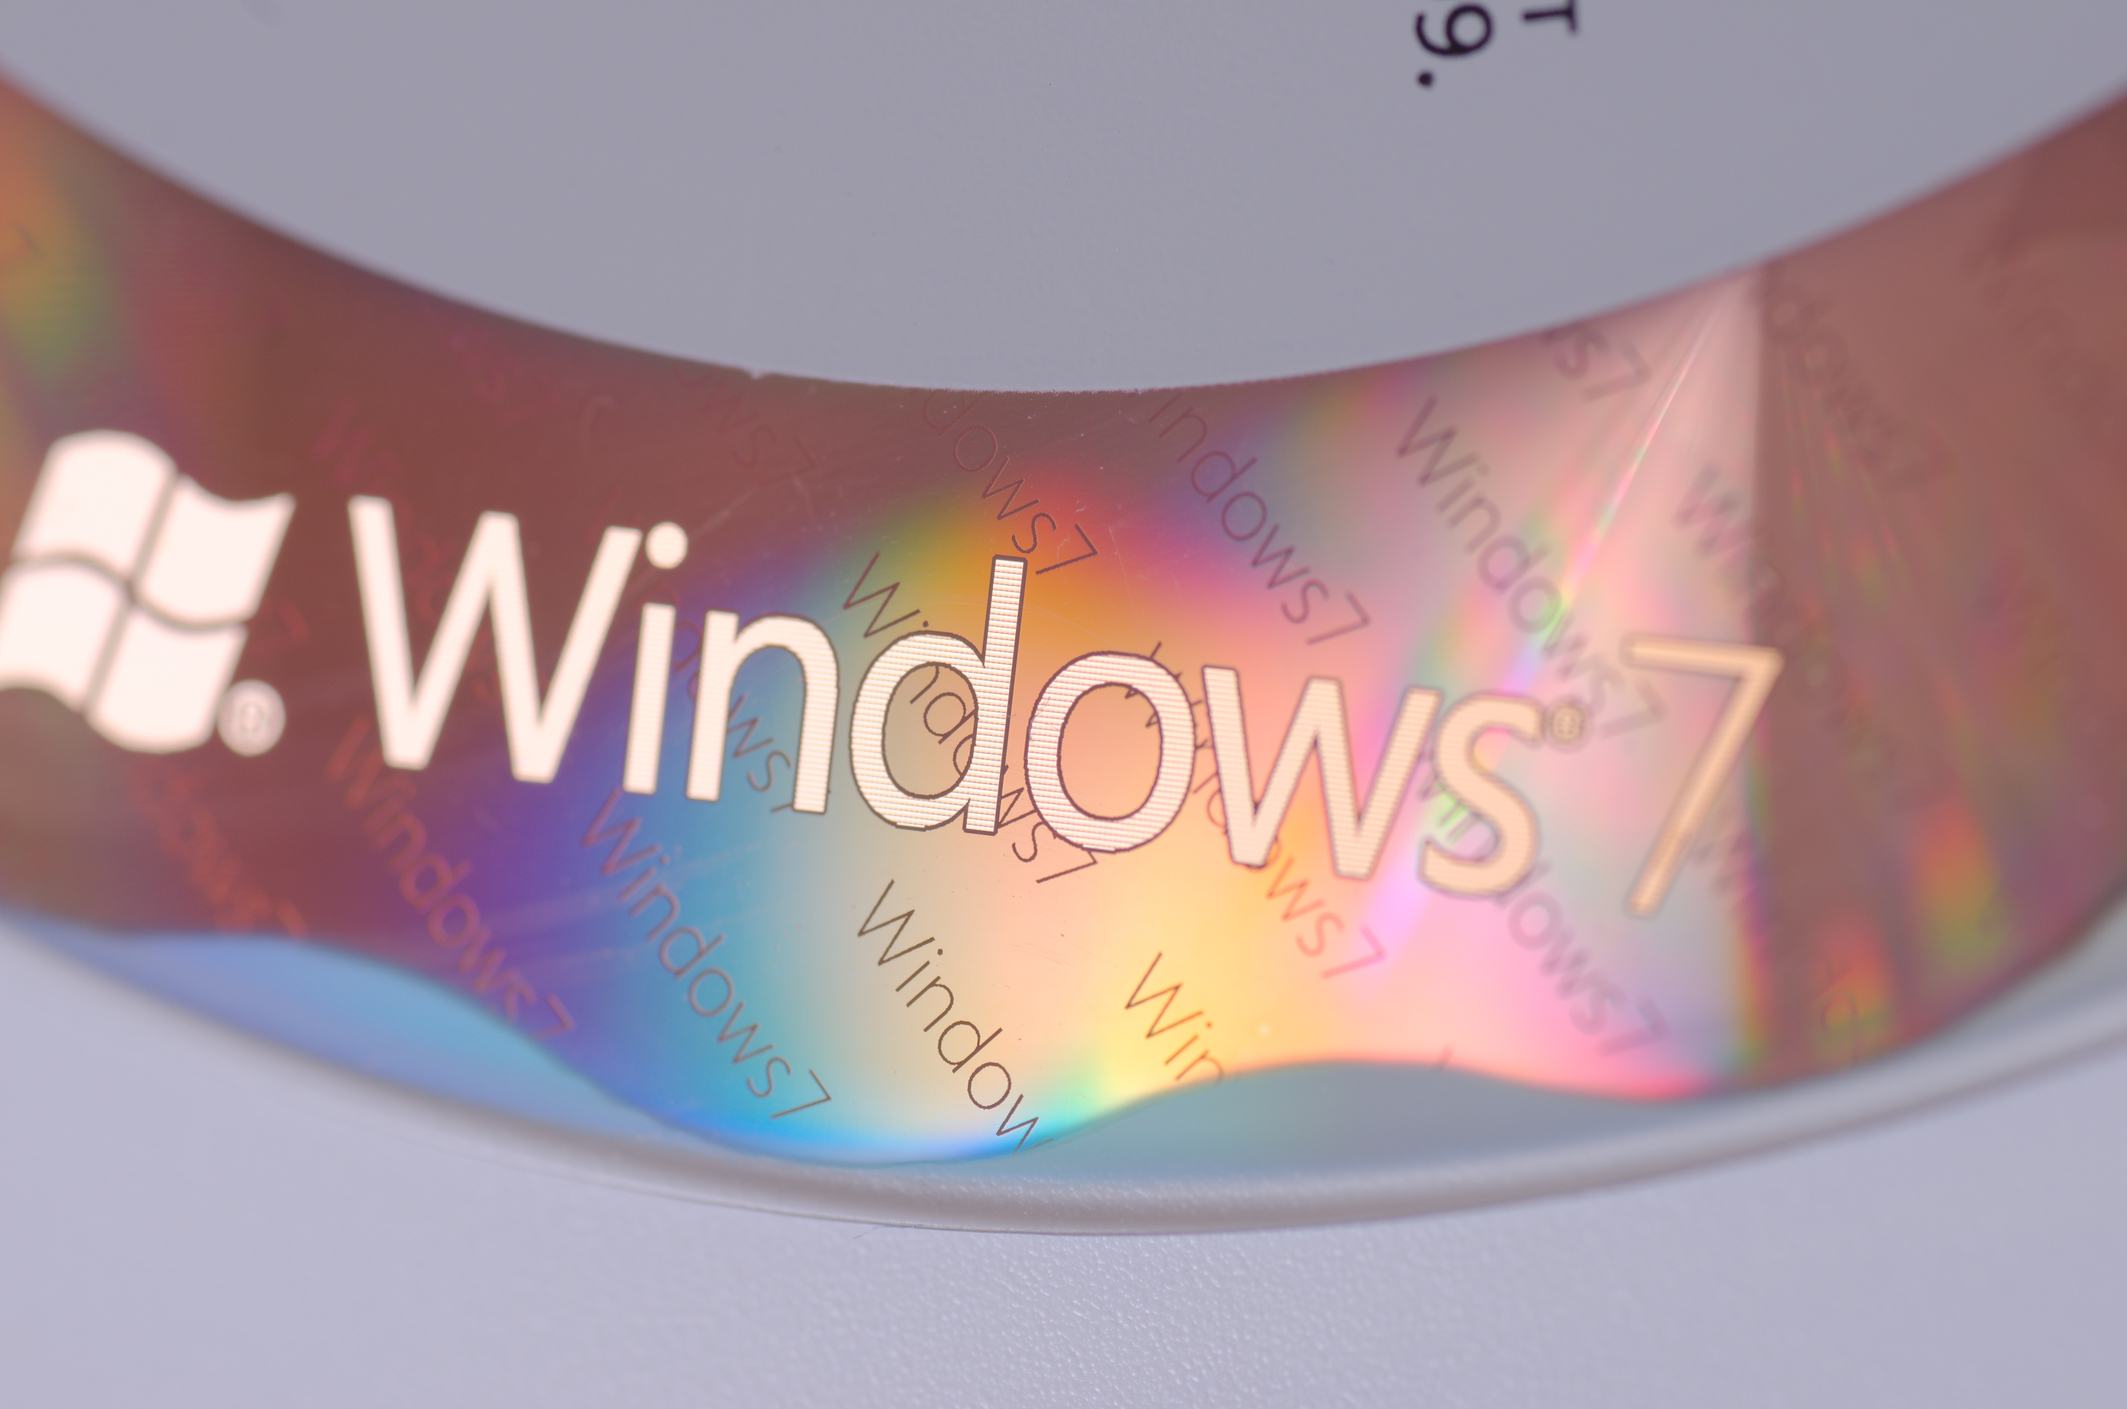 , Still on Windows 7? It’s Time to Make a Move